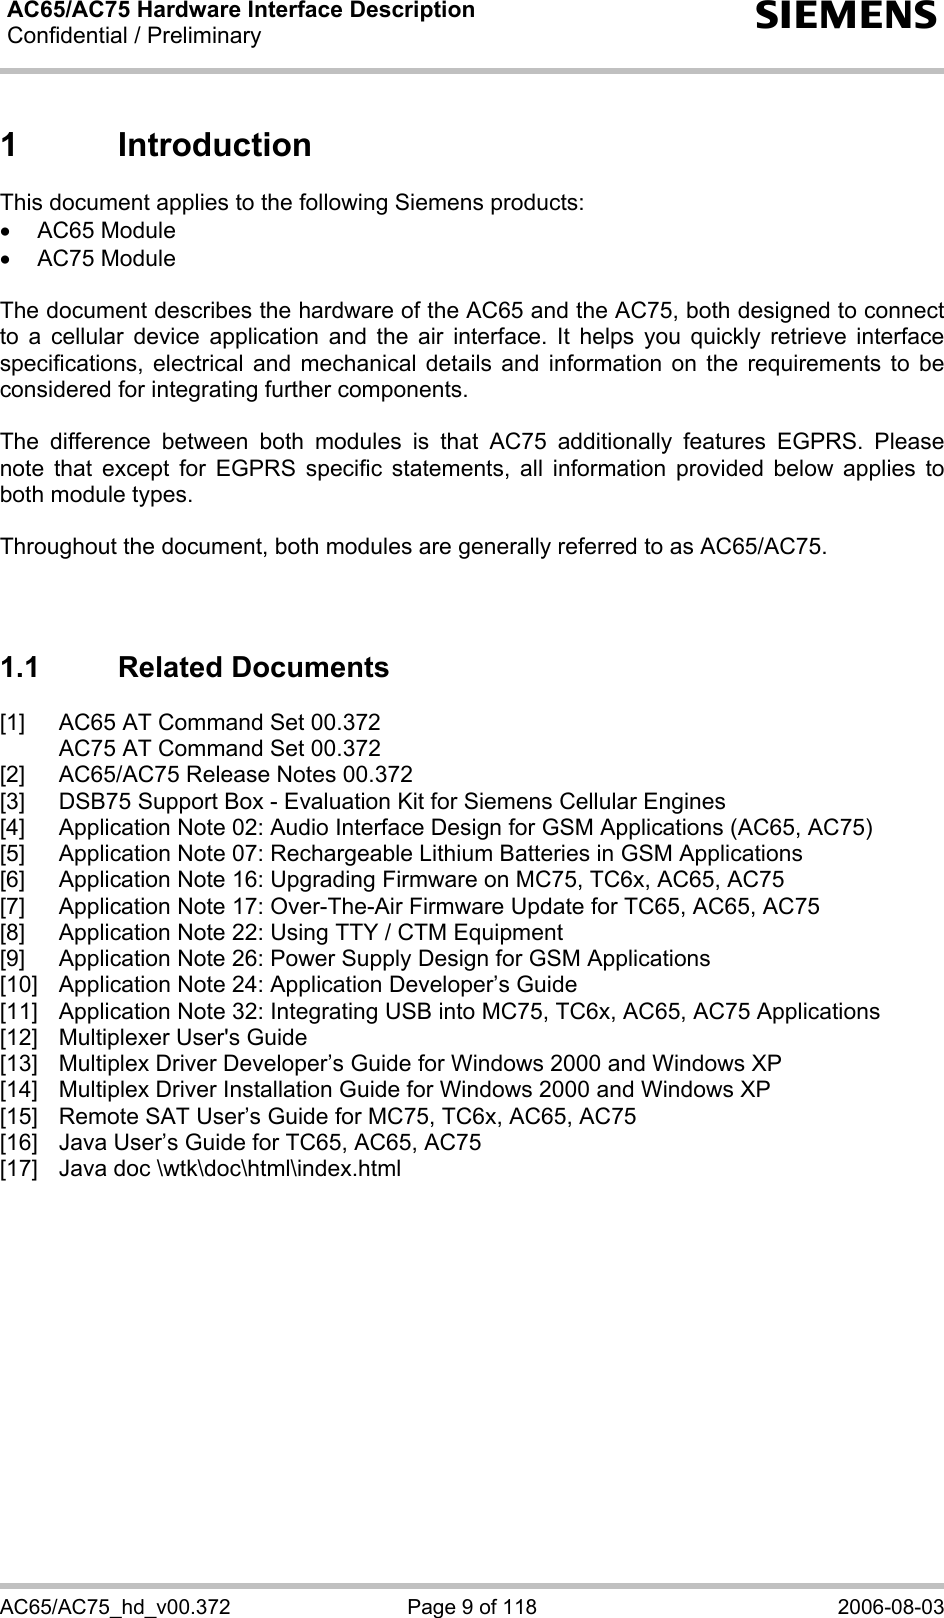 AC65/AC75 Hardware Interface Description Confidential / Preliminary  s AC65/AC75_hd_v00.372  Page 9 of 118  2006-08-03 1 Introduction This document applies to the following Siemens products: • AC65 Module • AC75 Module  The document describes the hardware of the AC65 and the AC75, both designed to connect to a cellular device application and the air interface. It helps you quickly retrieve interface specifications, electrical and mechanical details and information on the requirements to be considered for integrating further components.  The difference between both modules is that AC75 additionally features EGPRS. Please note that except for EGPRS specific statements, all information provided below applies to both module types.   Throughout the document, both modules are generally referred to as AC65/AC75.   1.1 Related Documents [1]  AC65 AT Command Set 00.372   AC75 AT Command Set 00.372 [2]  AC65/AC75 Release Notes 00.372 [3]  DSB75 Support Box - Evaluation Kit for Siemens Cellular Engines [4]  Application Note 02: Audio Interface Design for GSM Applications (AC65, AC75) [5]  Application Note 07: Rechargeable Lithium Batteries in GSM Applications [6]  Application Note 16: Upgrading Firmware on MC75, TC6x, AC65, AC75 [7]  Application Note 17: Over-The-Air Firmware Update for TC65, AC65, AC75 [8]  Application Note 22: Using TTY / CTM Equipment [9]  Application Note 26: Power Supply Design for GSM Applications [10]  Application Note 24: Application Developer’s Guide [11]  Application Note 32: Integrating USB into MC75, TC6x, AC65, AC75 Applications [12]  Multiplexer User&apos;s Guide [13]  Multiplex Driver Developer’s Guide for Windows 2000 and Windows XP  [14]  Multiplex Driver Installation Guide for Windows 2000 and Windows XP [15]  Remote SAT User’s Guide for MC75, TC6x, AC65, AC75 [16]  Java User’s Guide for TC65, AC65, AC75 [17]  Java doc \wtk\doc\html\index.html  